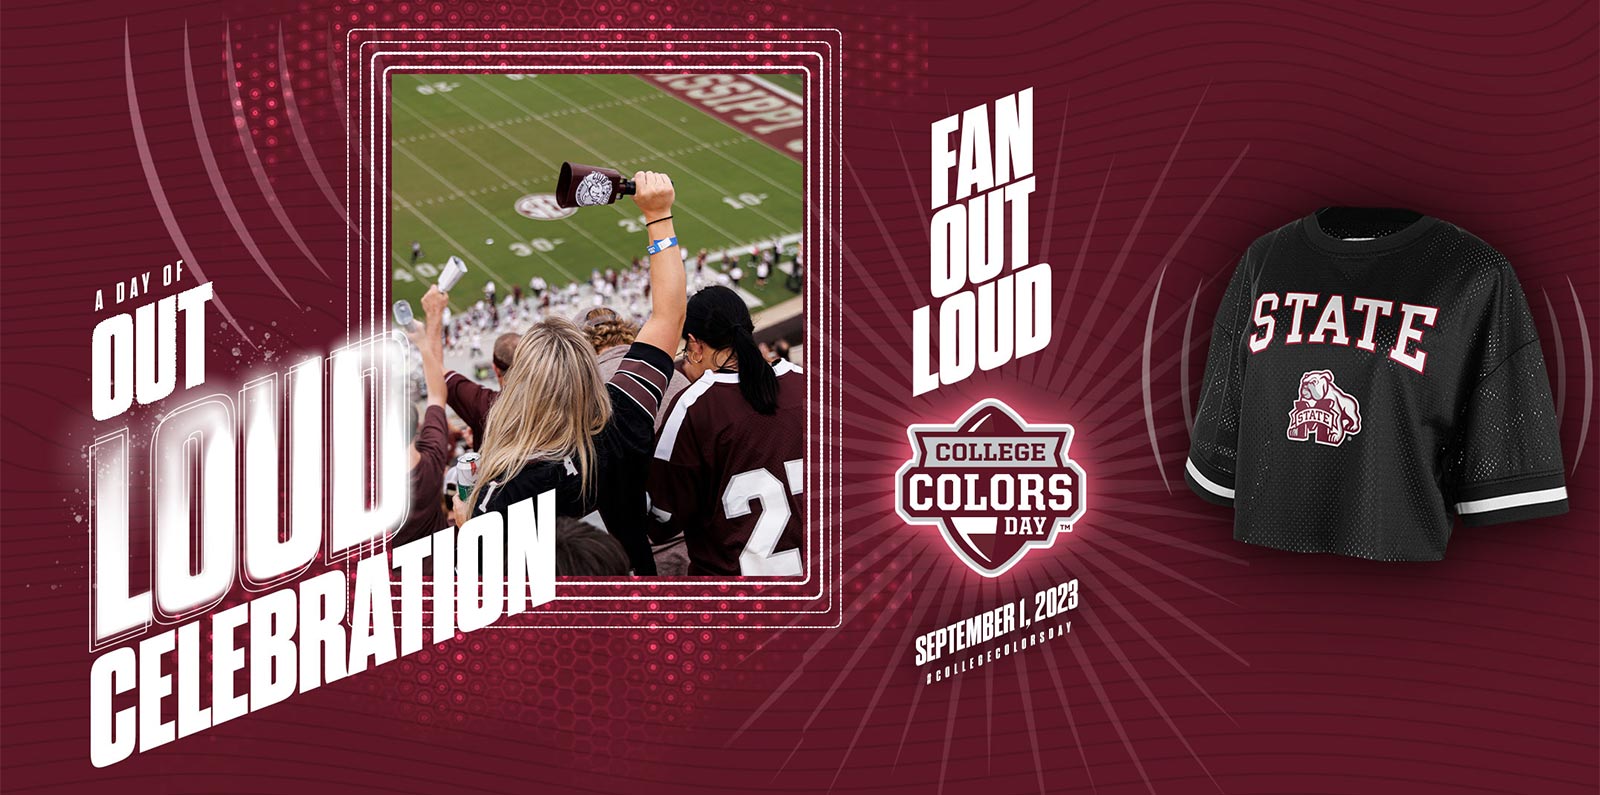 "Fan Out Loud" for College Colors Day illustration